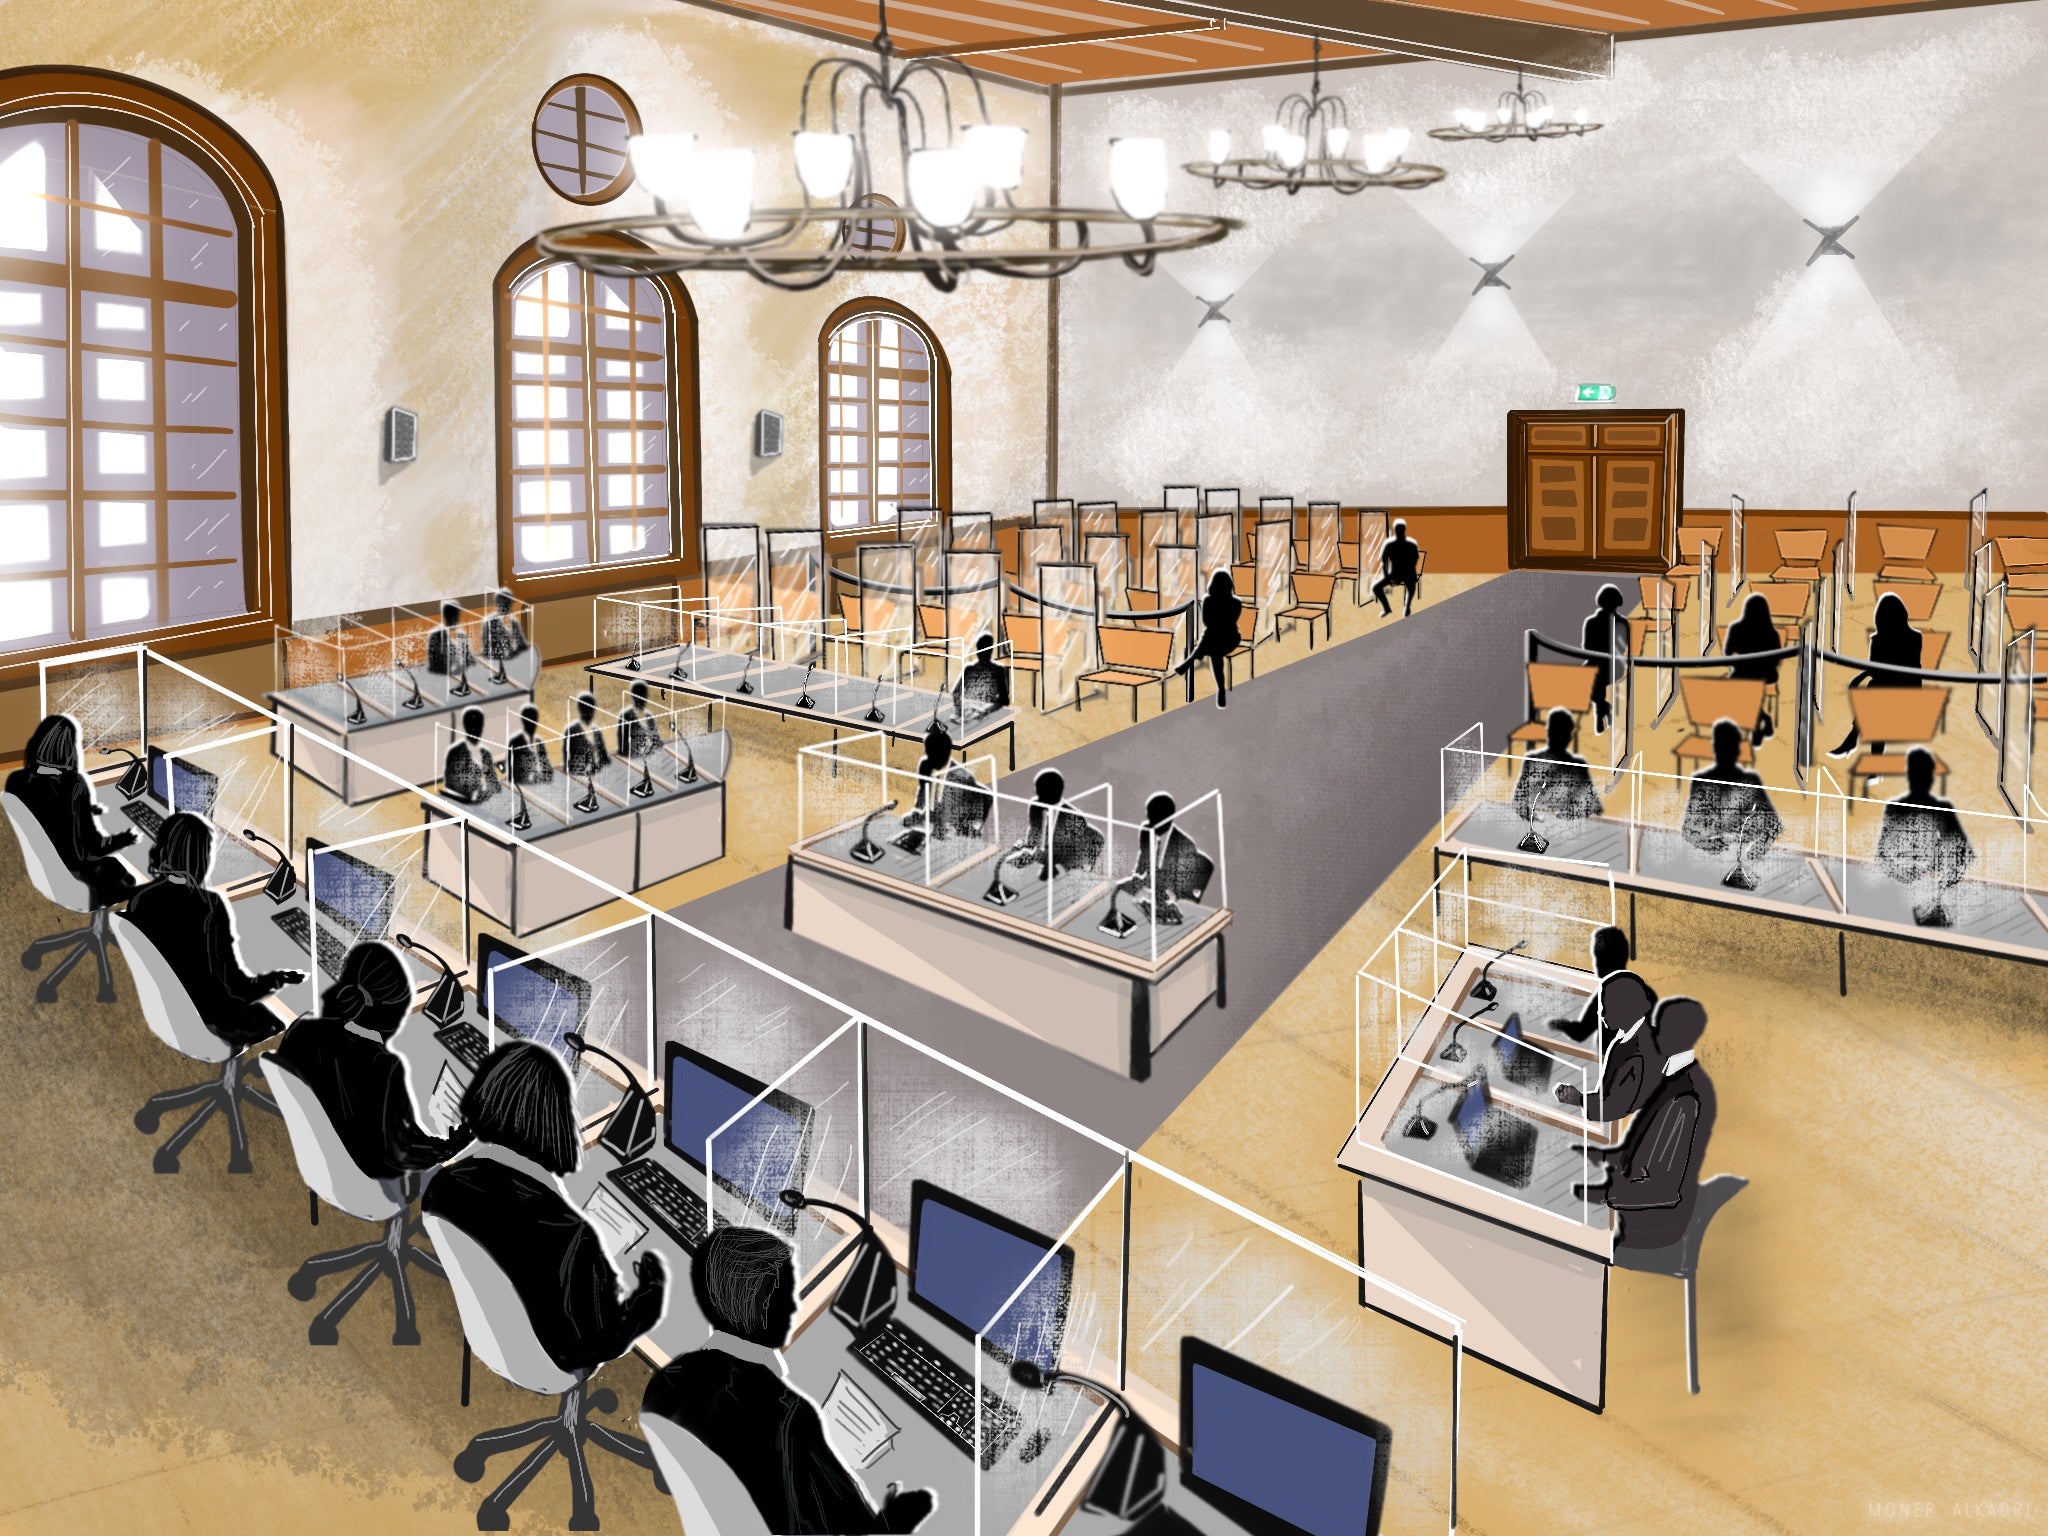 Overview illustration of a courtroom